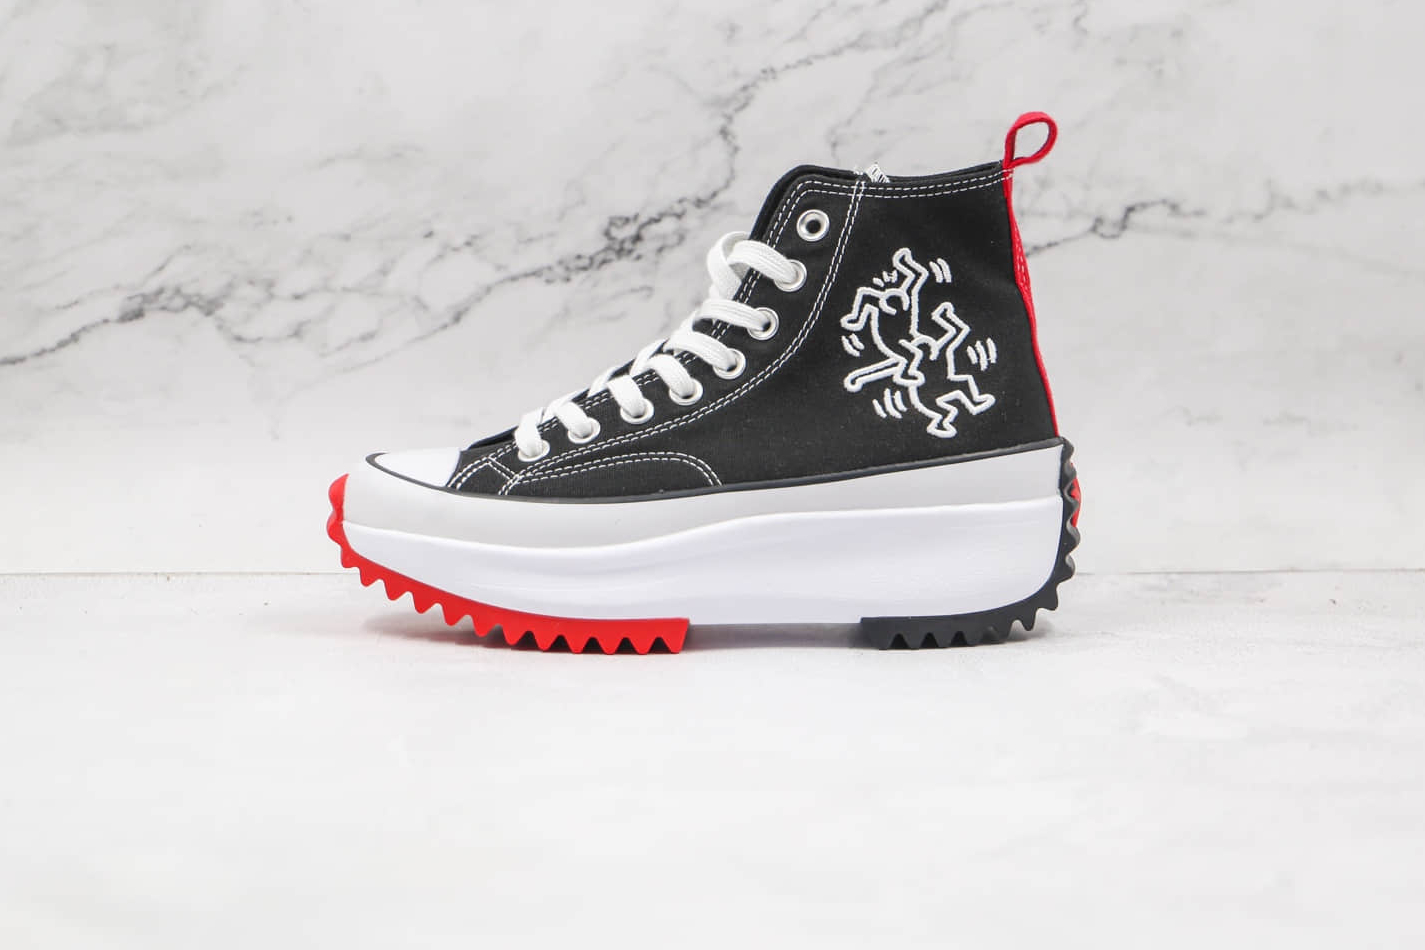 Converse Keith Haring x Run Star Hike 171859C - Limited Edition Sneakers